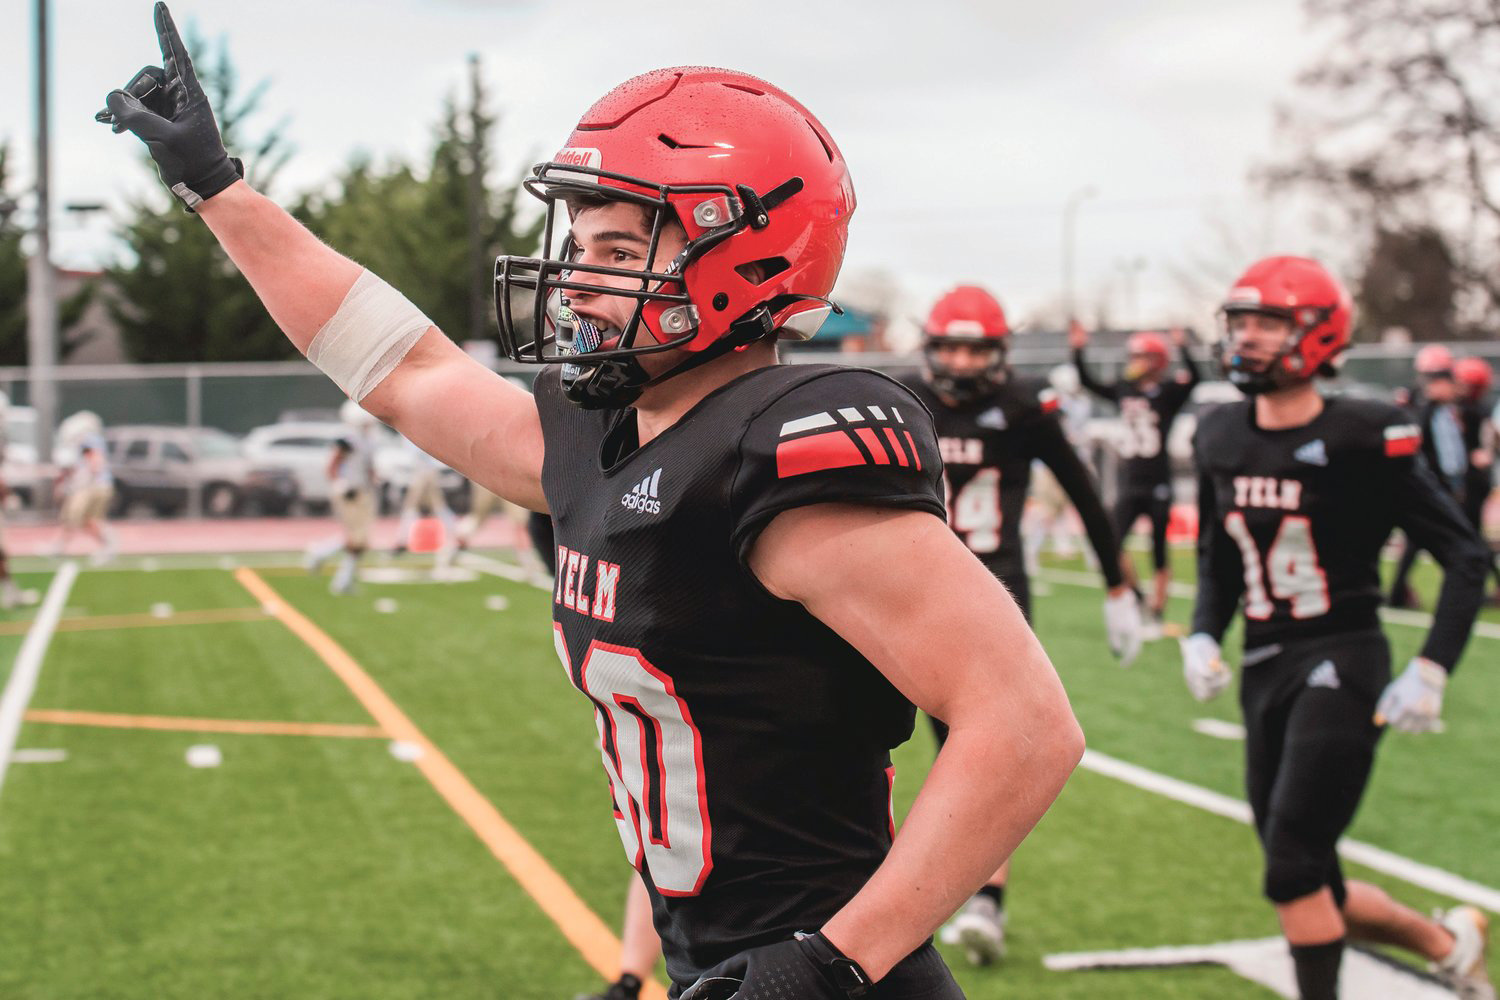 Yelm’s William Carreto (30) holds up a finger after making an interception during a playoff game against the Mead Panthers Nov. 6 at Yelm High School.